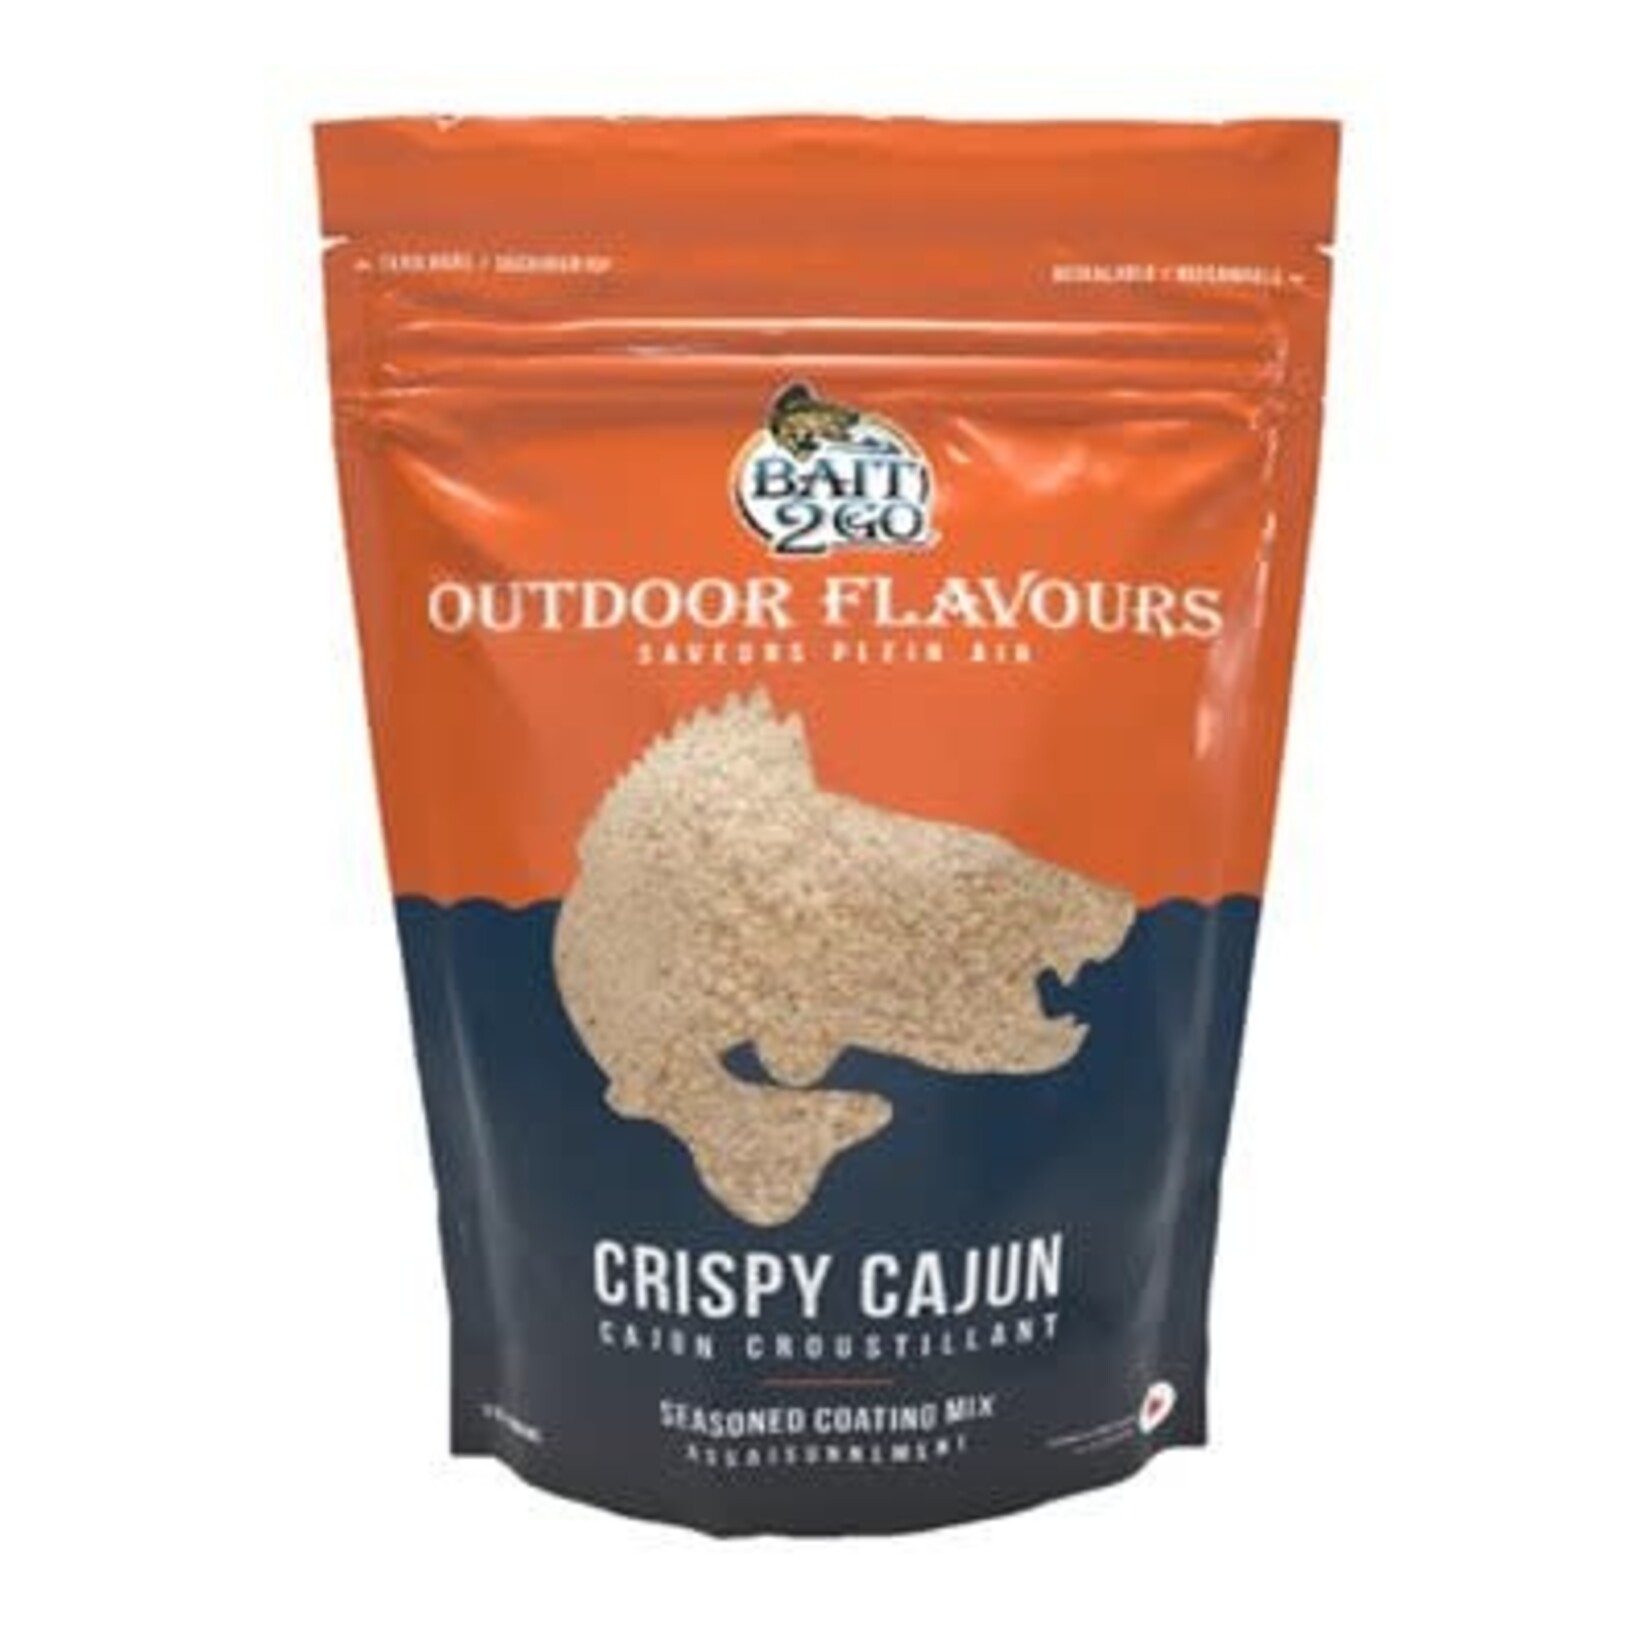 OUTDOOR FLAVOURS Panure Outdoor Flavours Cajun 315G